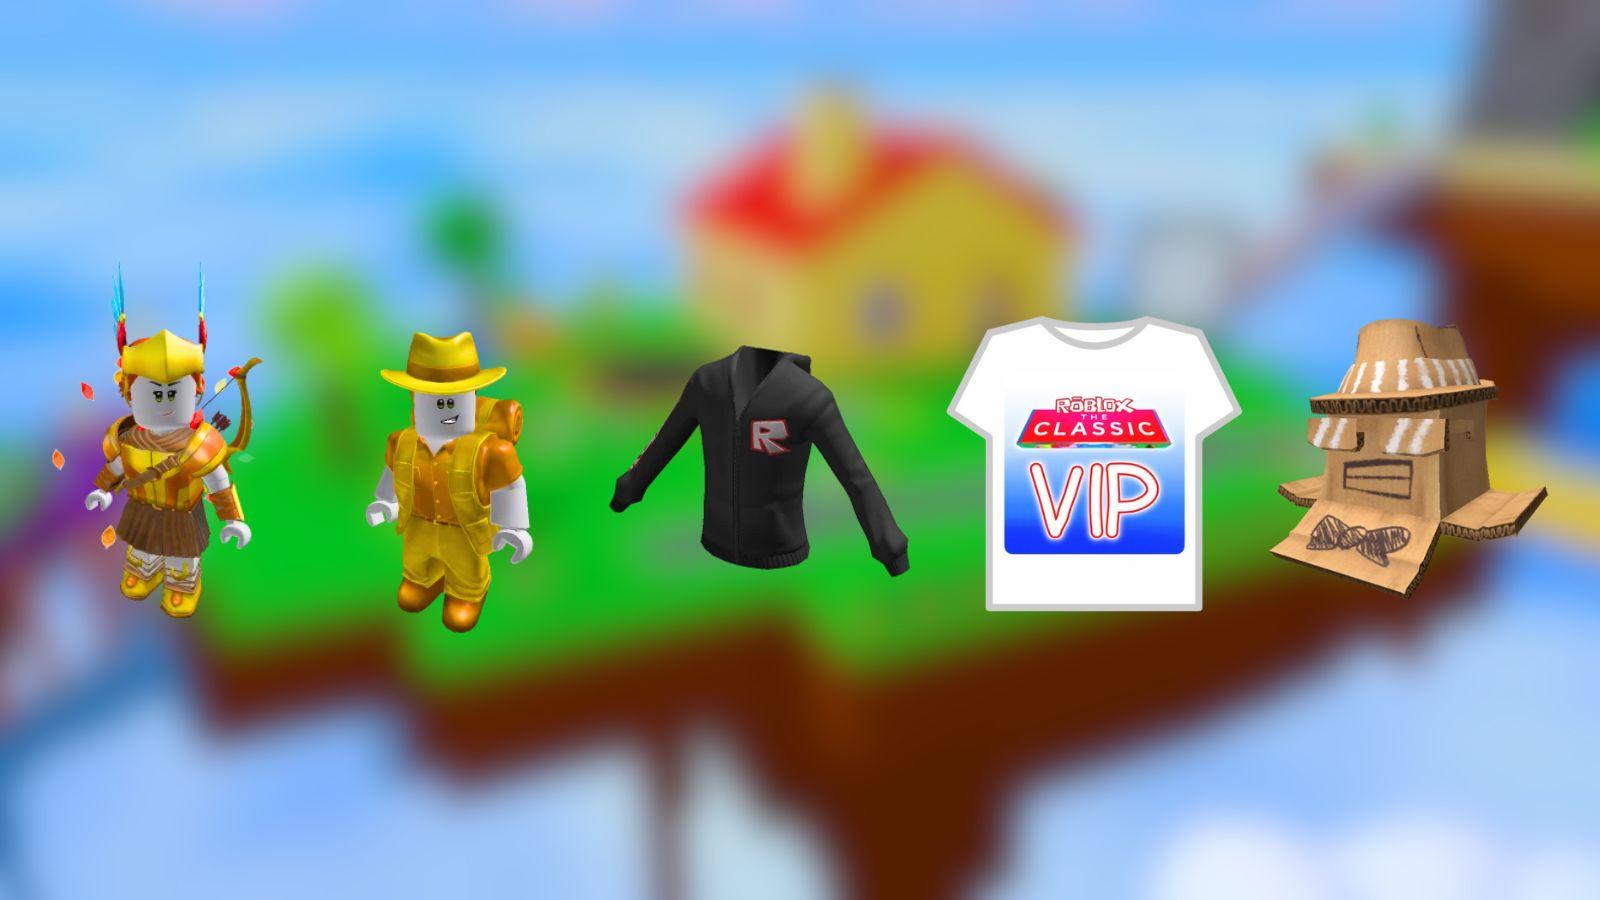 Every marketplace item in Roblox The Classic event